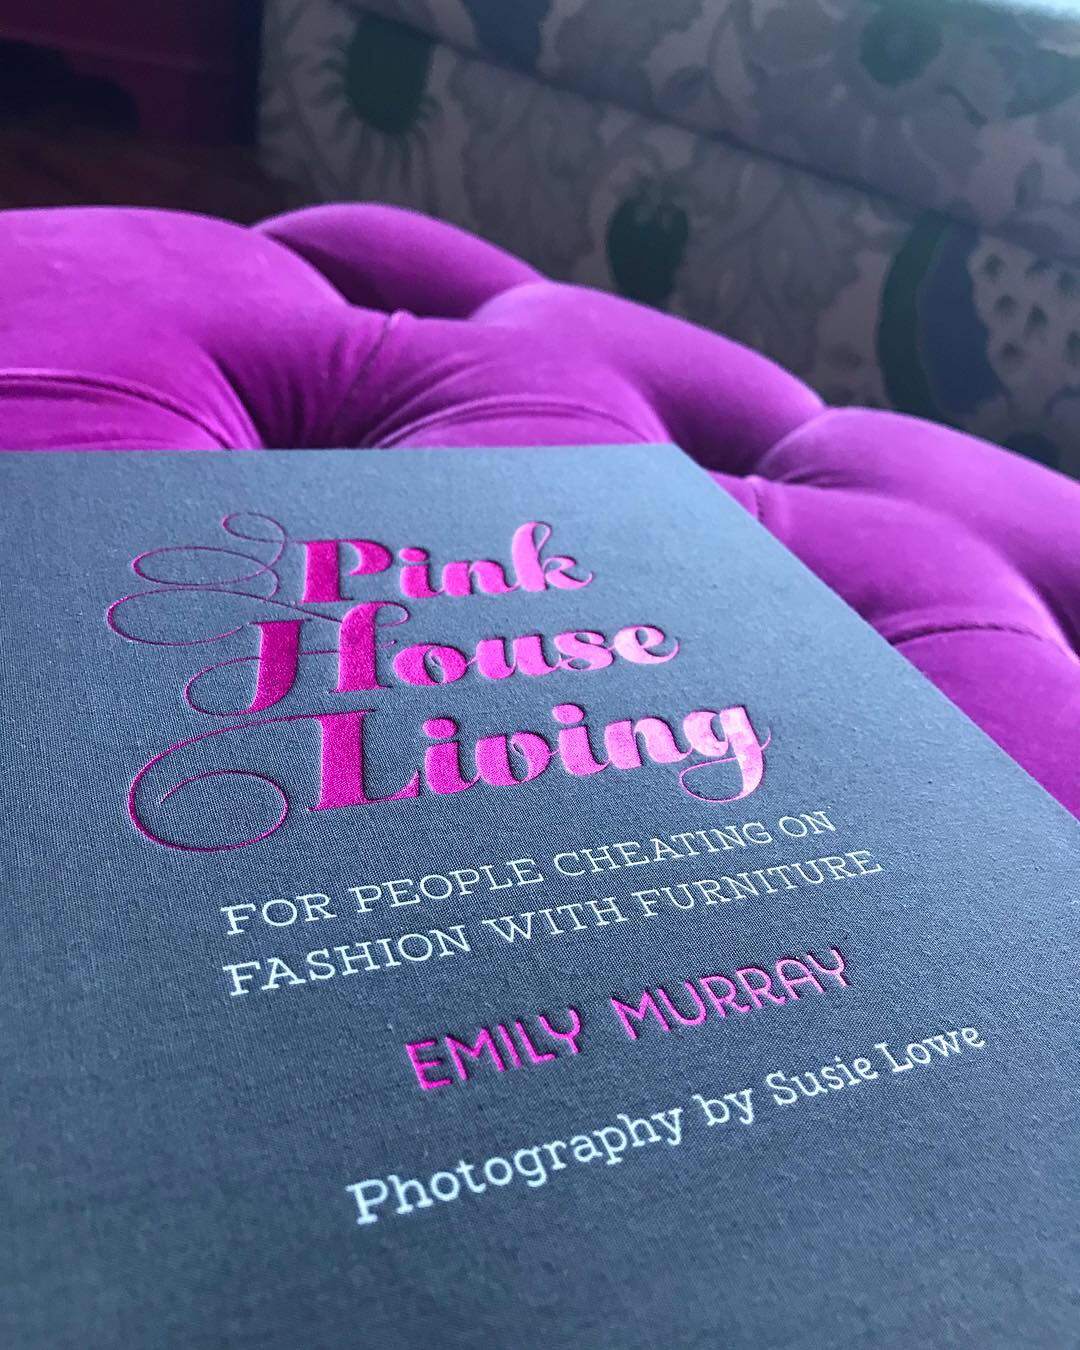 Pink House Living interiors home decor book by Emily Murray